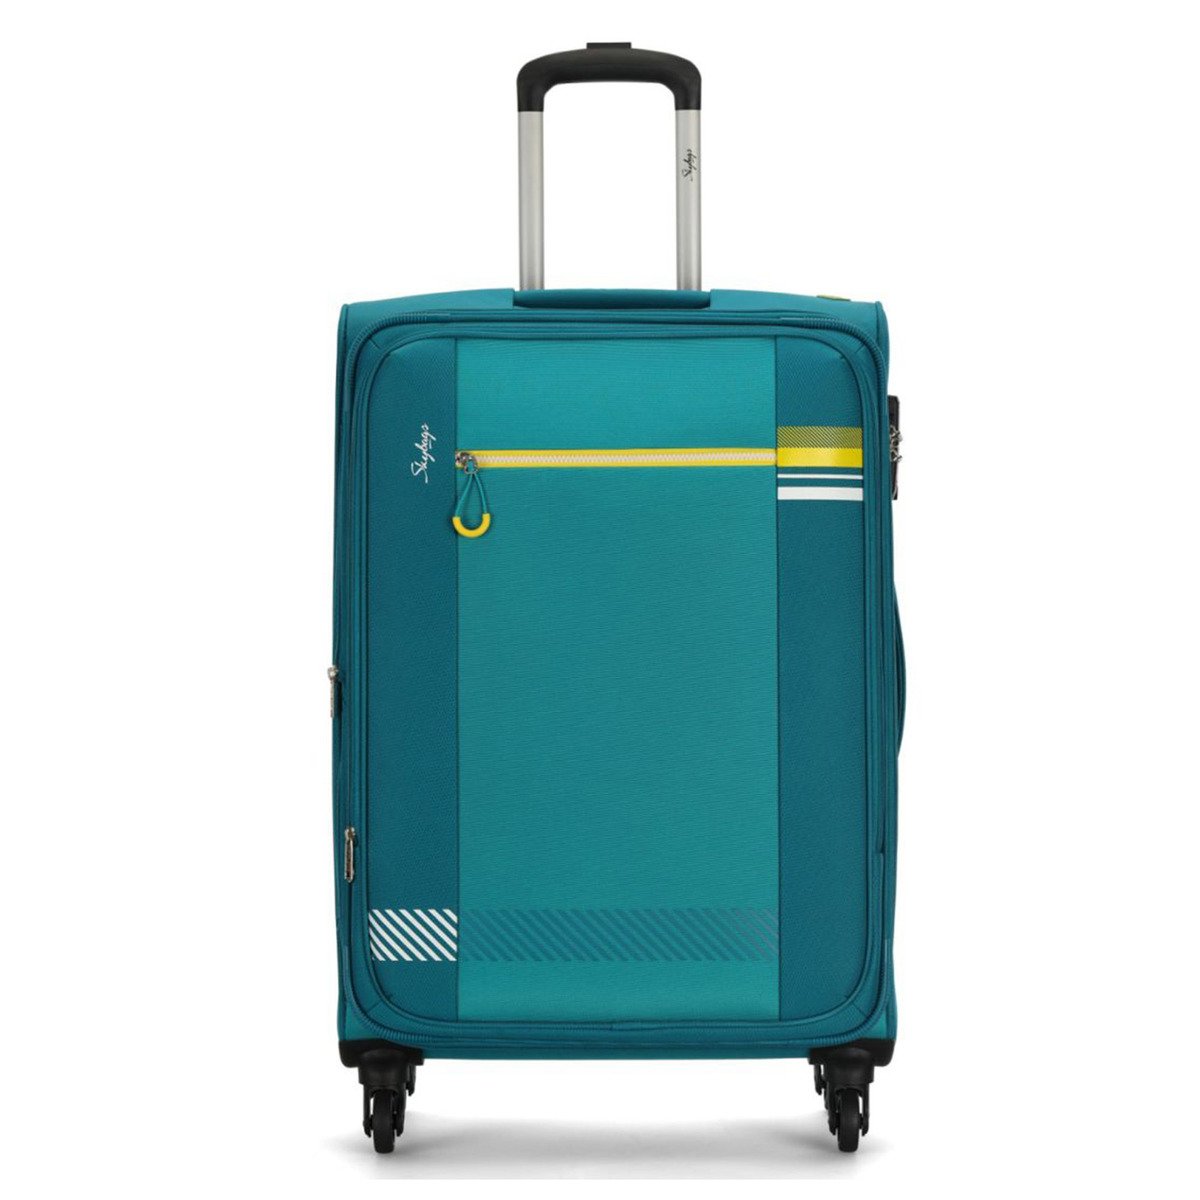 Skybags Vybe 4 Wheel Soft Trolley, 70 cm, Cyan Green